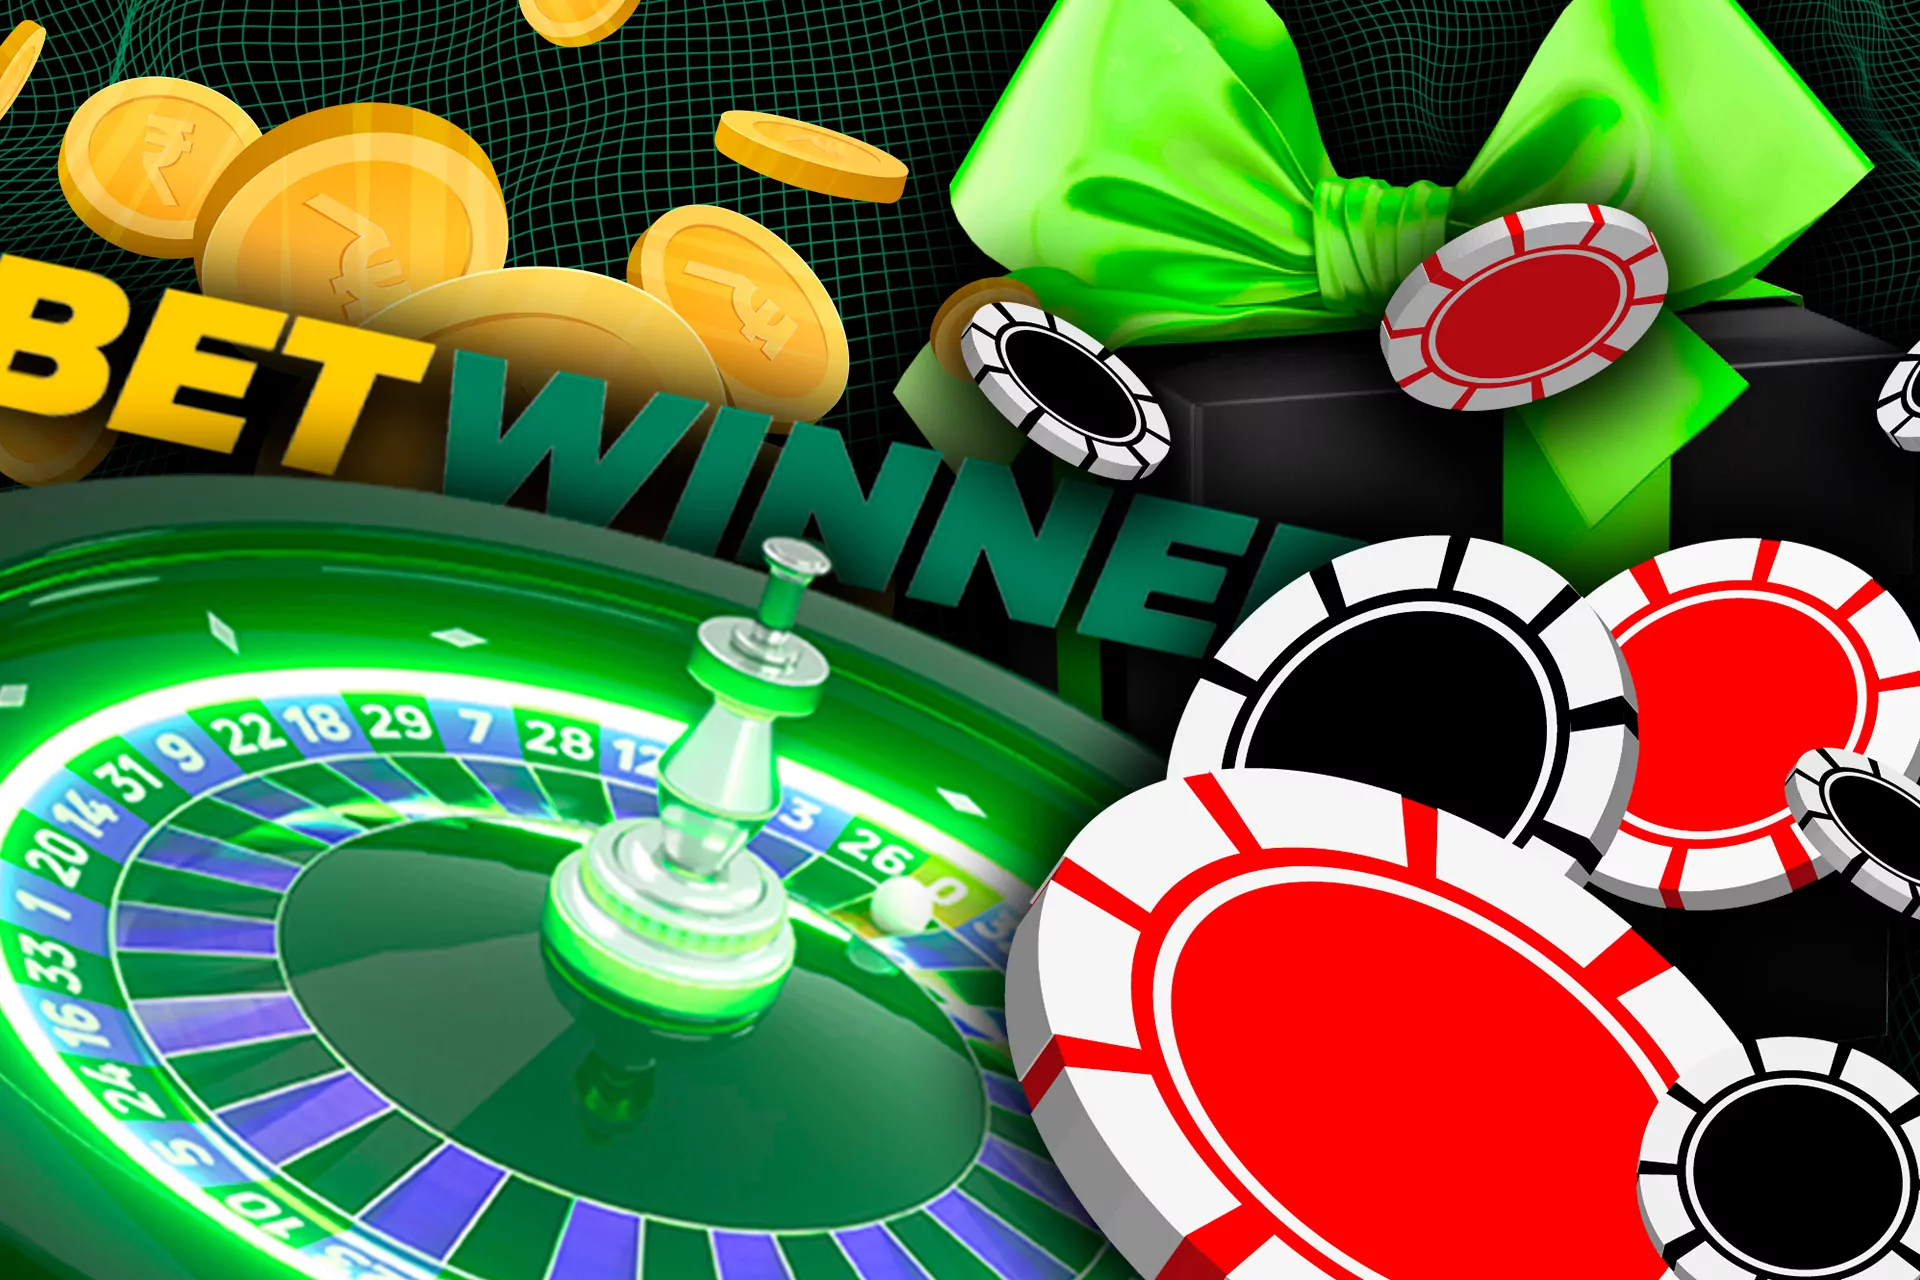 Casino players can claim a welcome bonus on the first deposit from Betwinner as well.